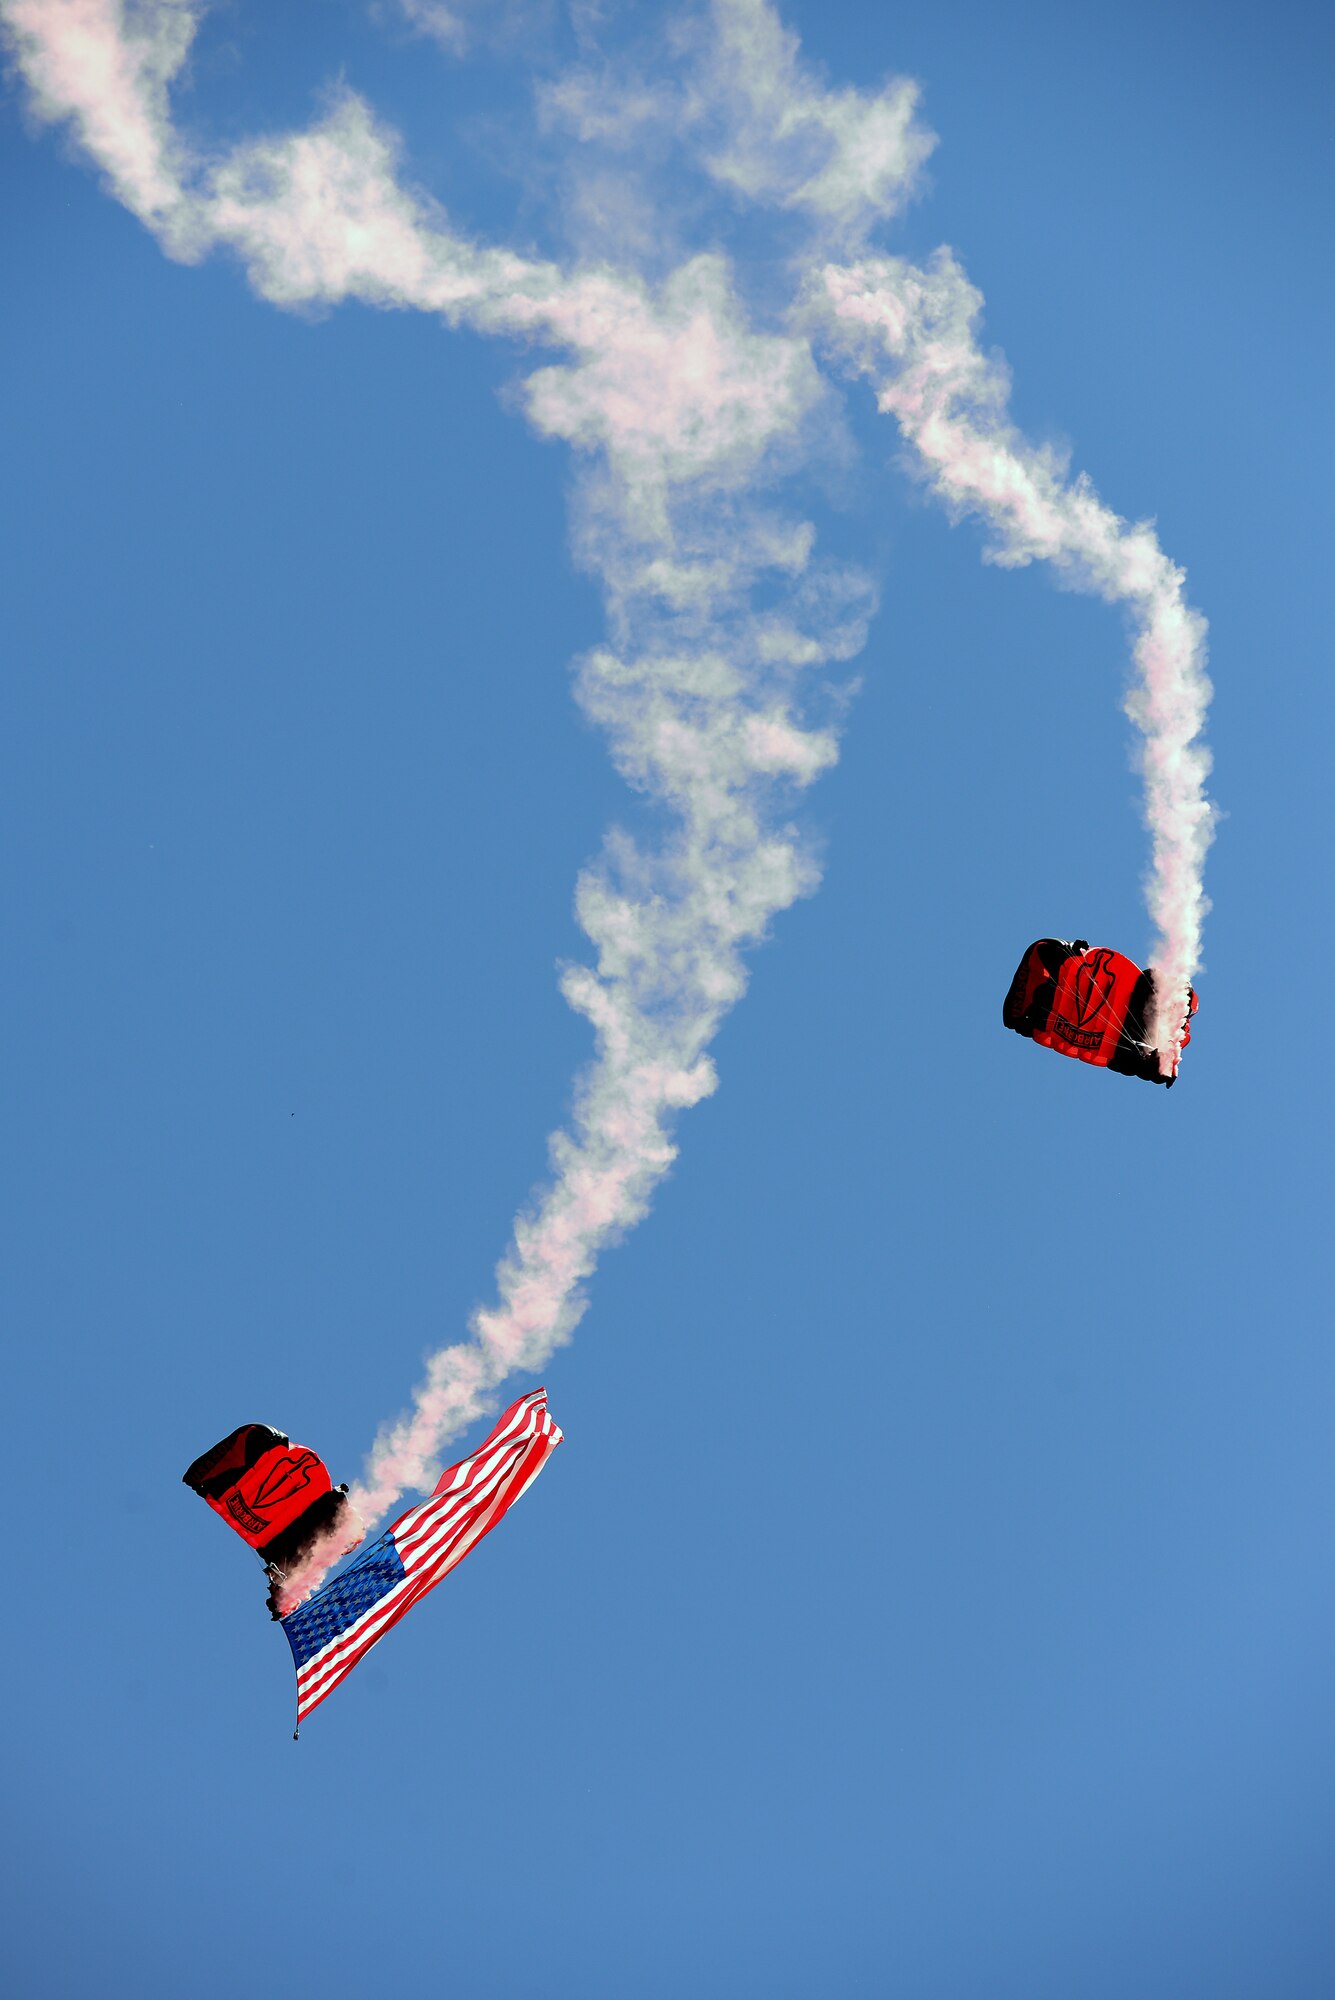 Members of the Black Daggers, the official U.S. Army Special Operations Command Parachute Demonstration Team, perform aerial stunts during Scott Air Force Base 2017 Air Show and Open House June 9, 2017, which celebrates the base’s 100th anniversary.  Black Daggers are highly trained Soldiers who insert themselves behind enemy lines to disrupt the movement of enemy troops and supplies to the front lines.  They frequently use parachutes to infiltrate without being detected. (U.S. Air Force photo by Tech. Sgt. Jonathan Fowler)